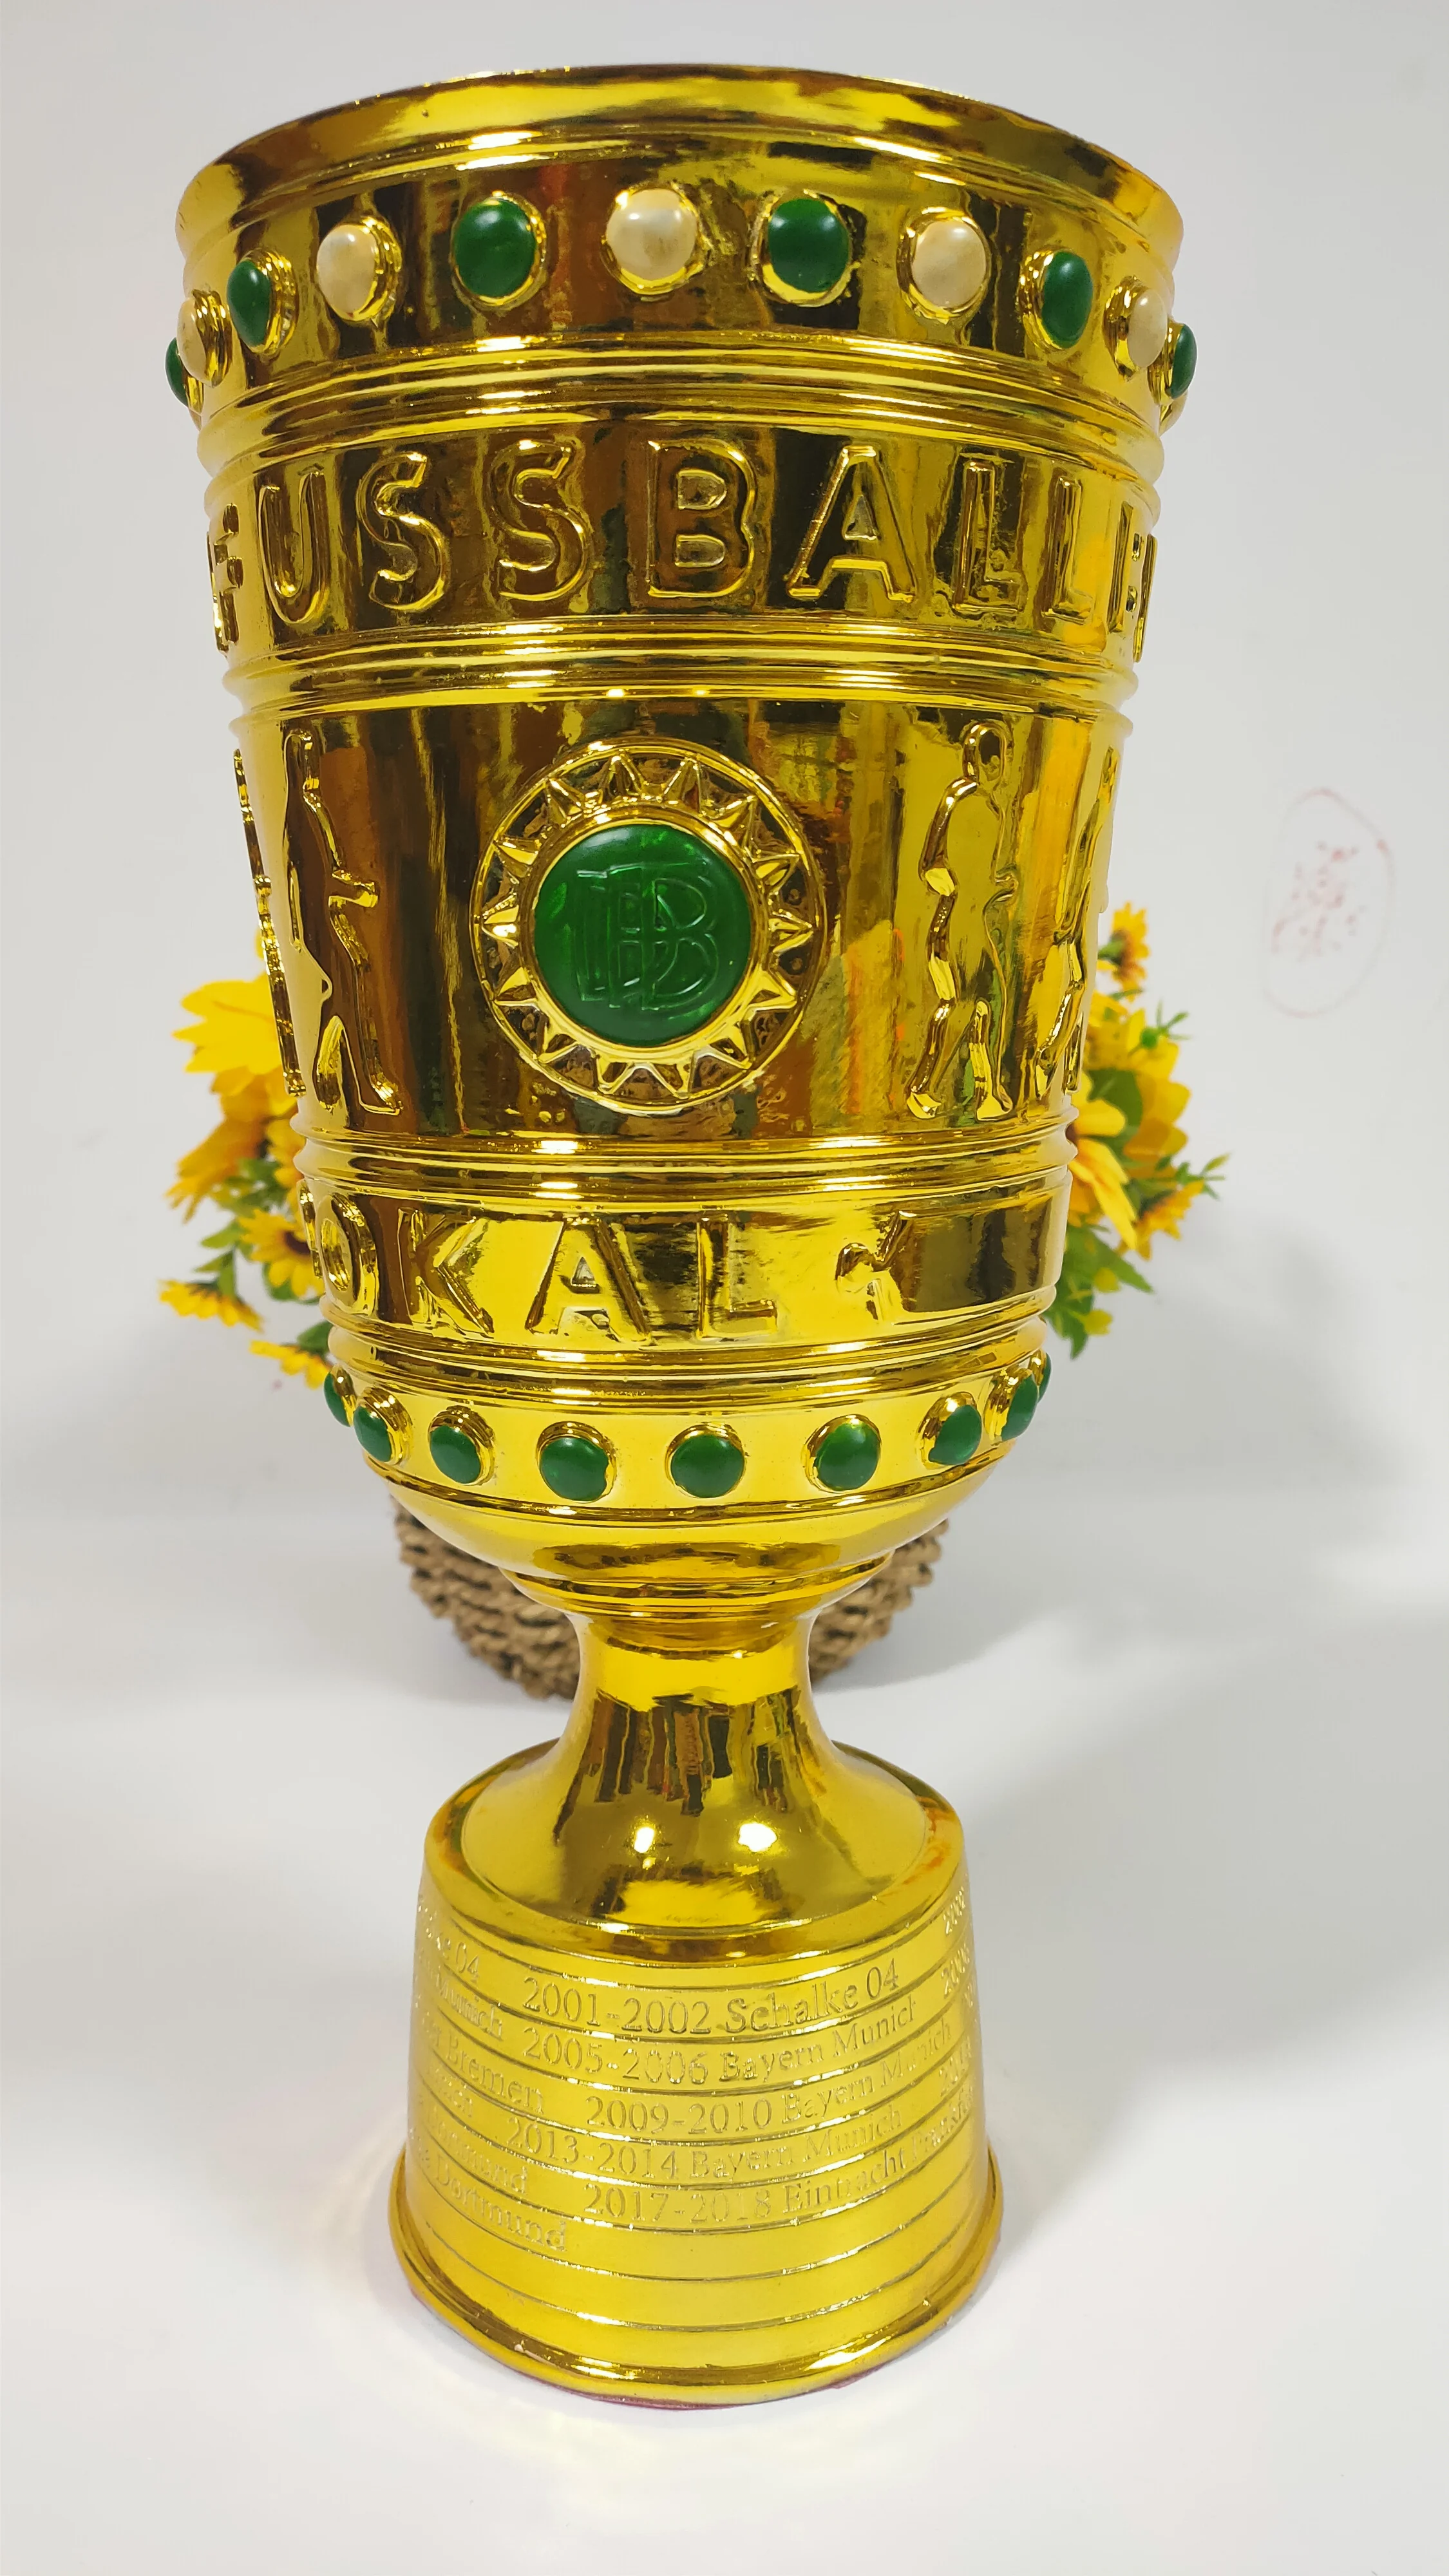 The DFB-Pokal Trophy Cup The Champions Trophy Cup German League Cup Premiere Ligapokal Trophy Cup